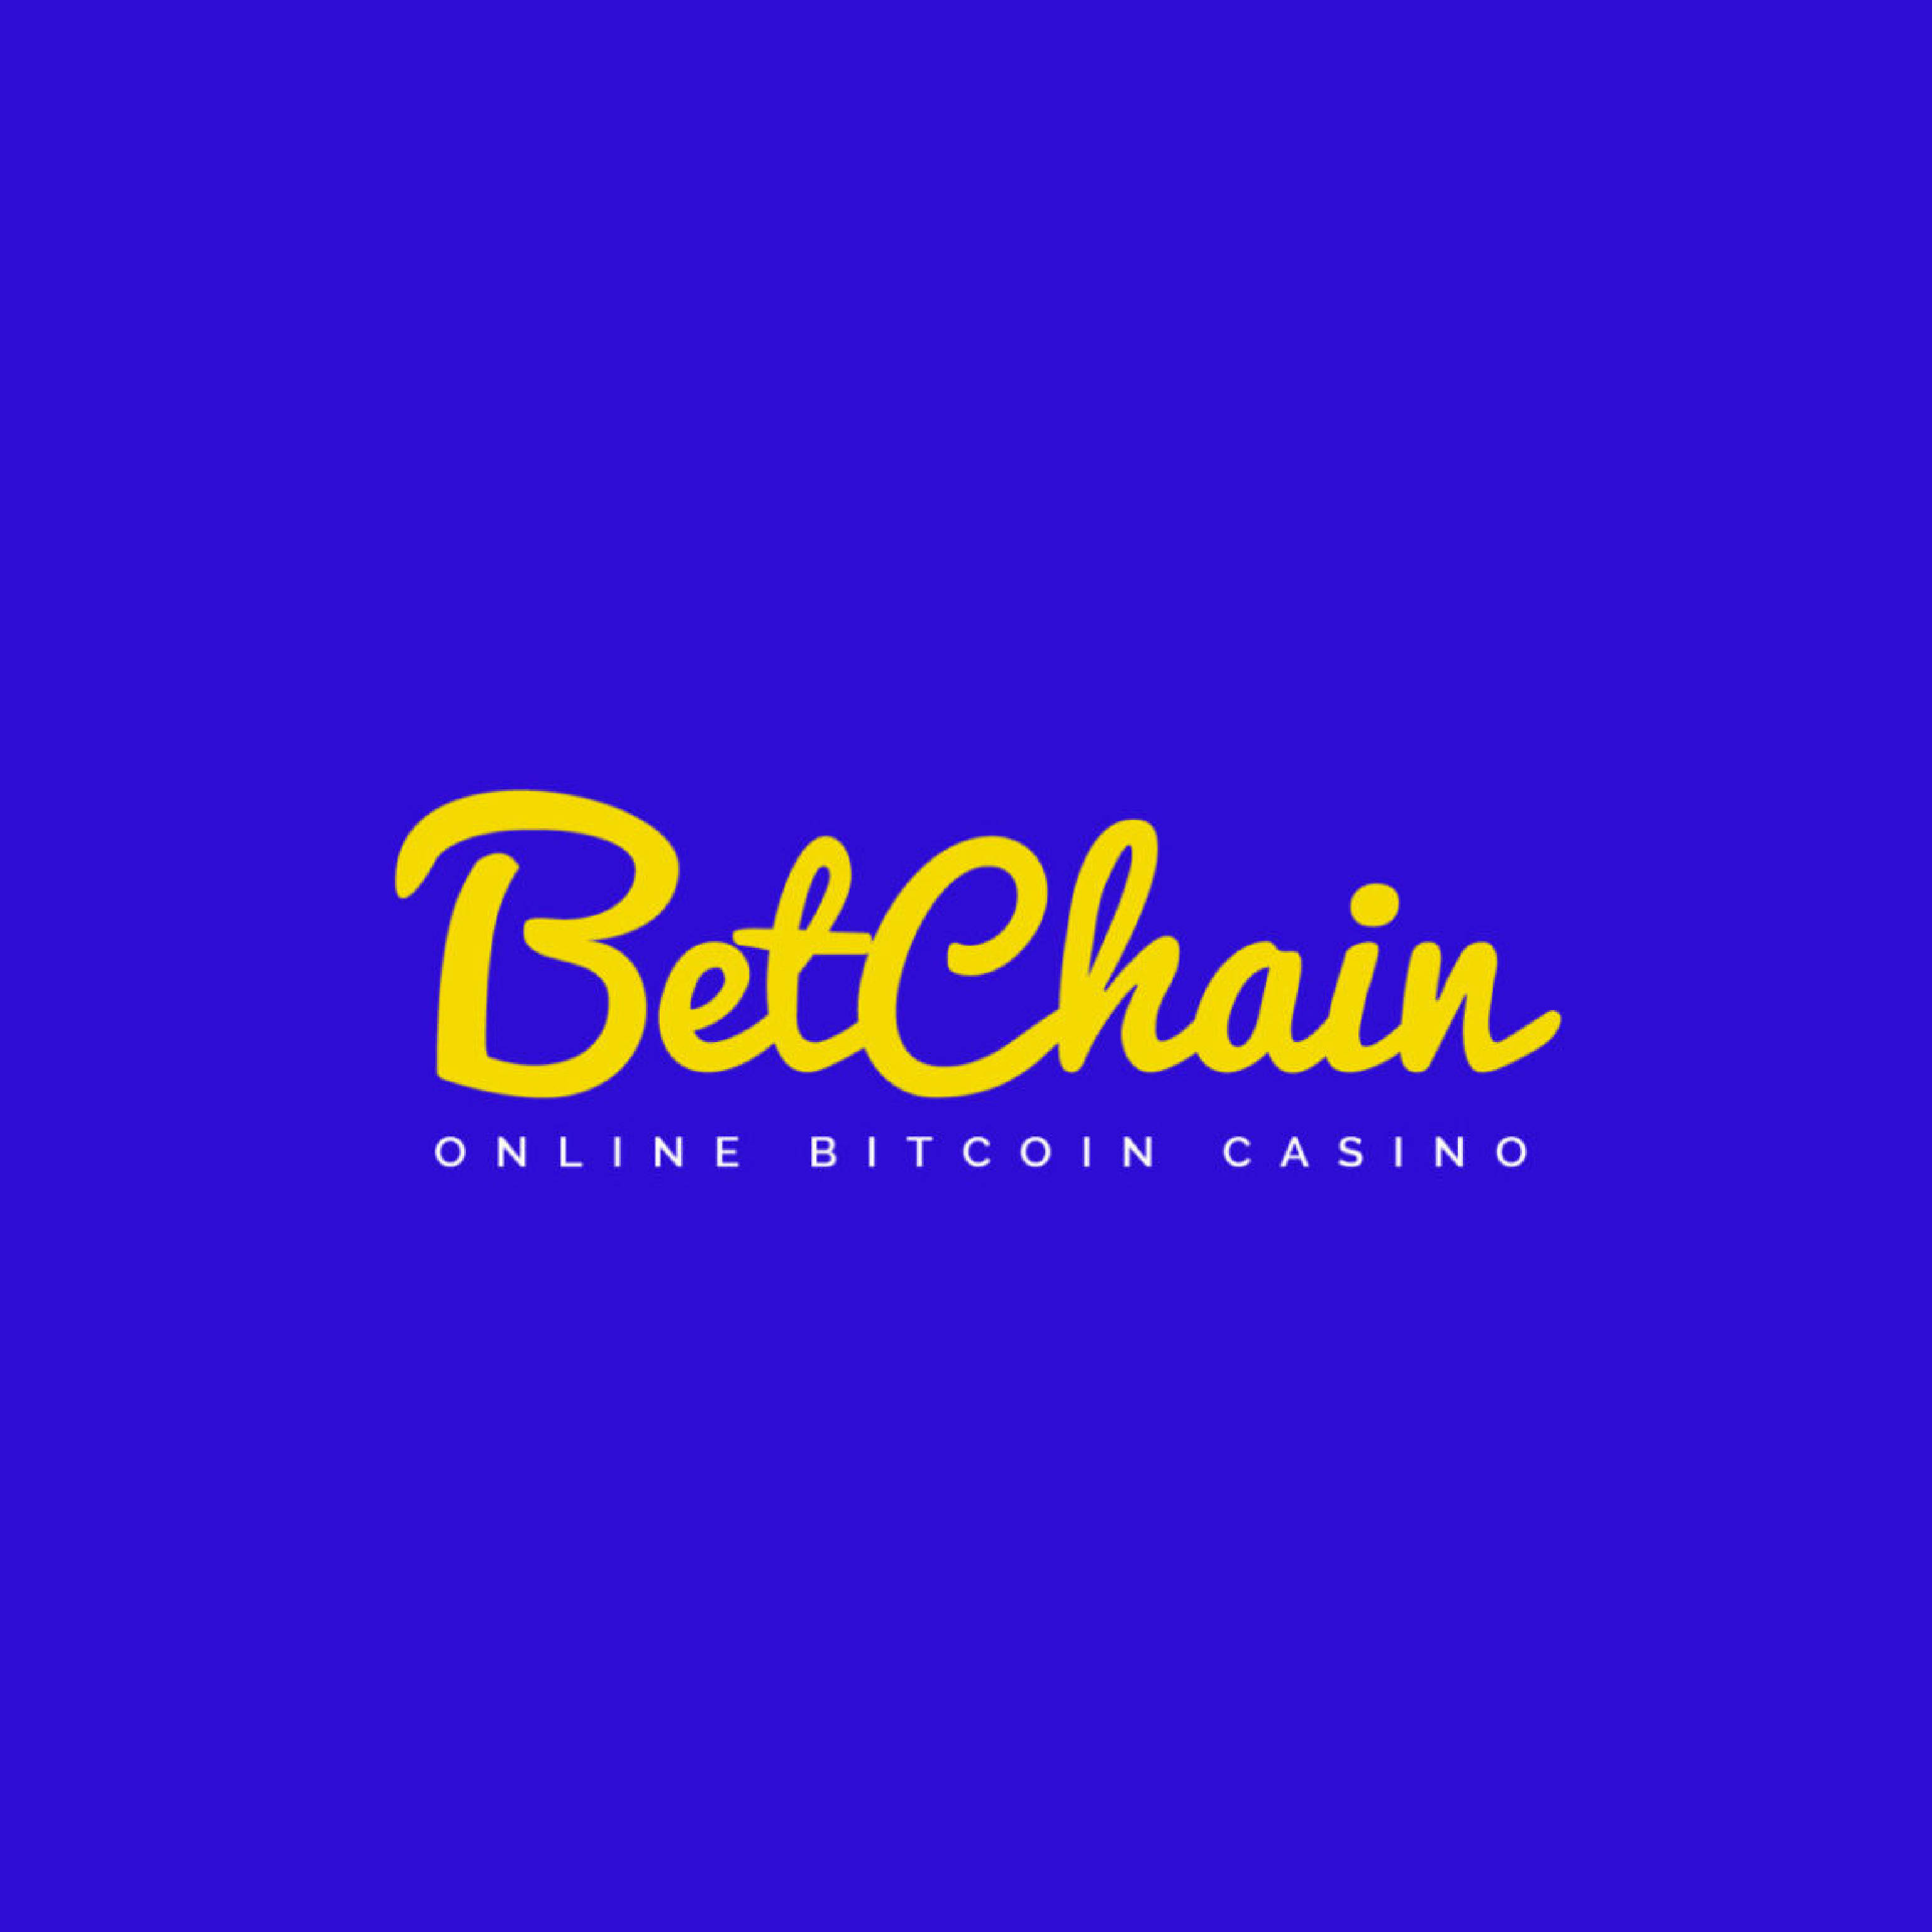 Play bitcoin slot games online